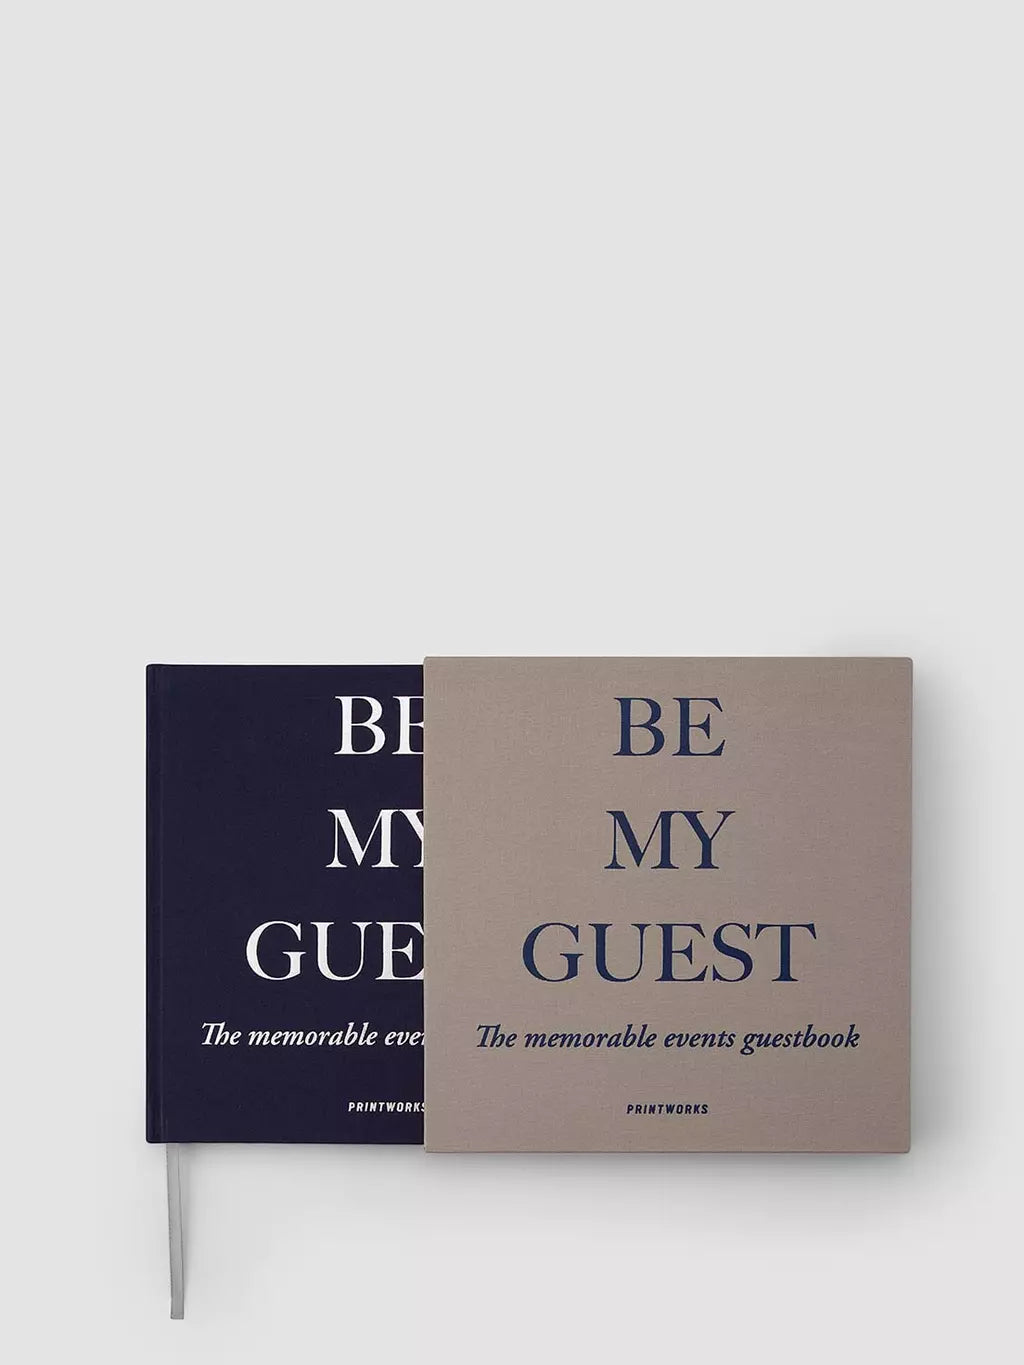 Navy guestbook with beige cover has a more sombre, grown-up mood.